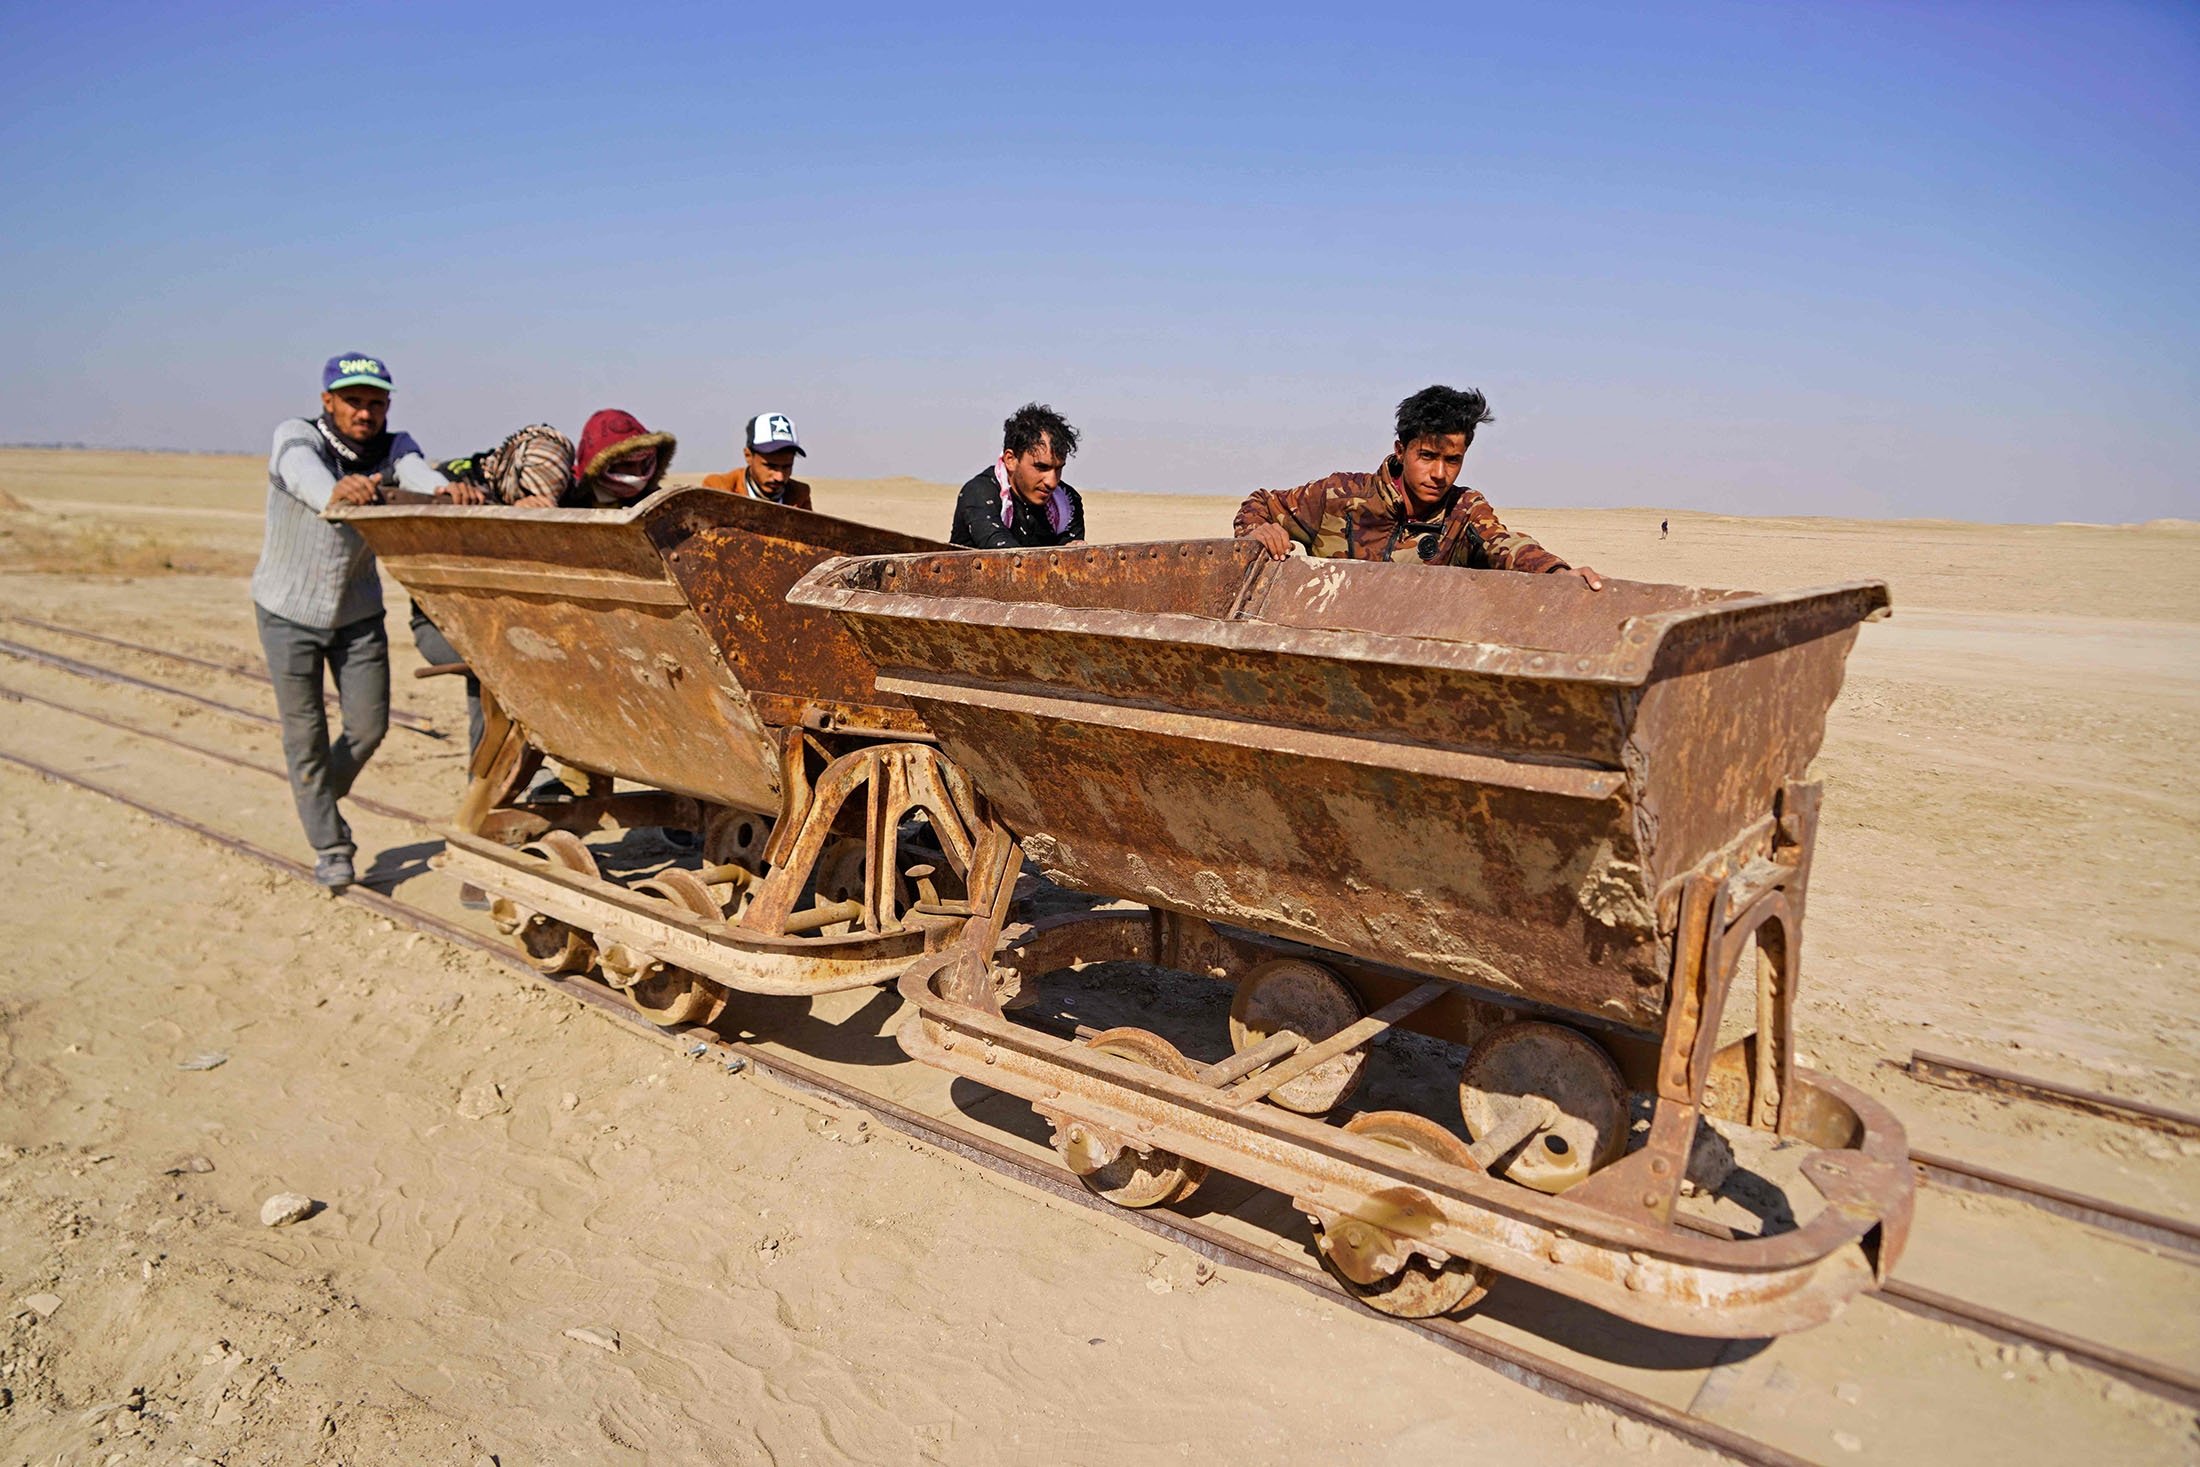 Workers use an old rail cart to transport material as they take part in a German-Iraqi archaeological expedition to restore the white temple of Anu in the Warka (ancient Uruk) site in Muthanna province, Iraq, Nov. 27, 2021. (AFP Photo)